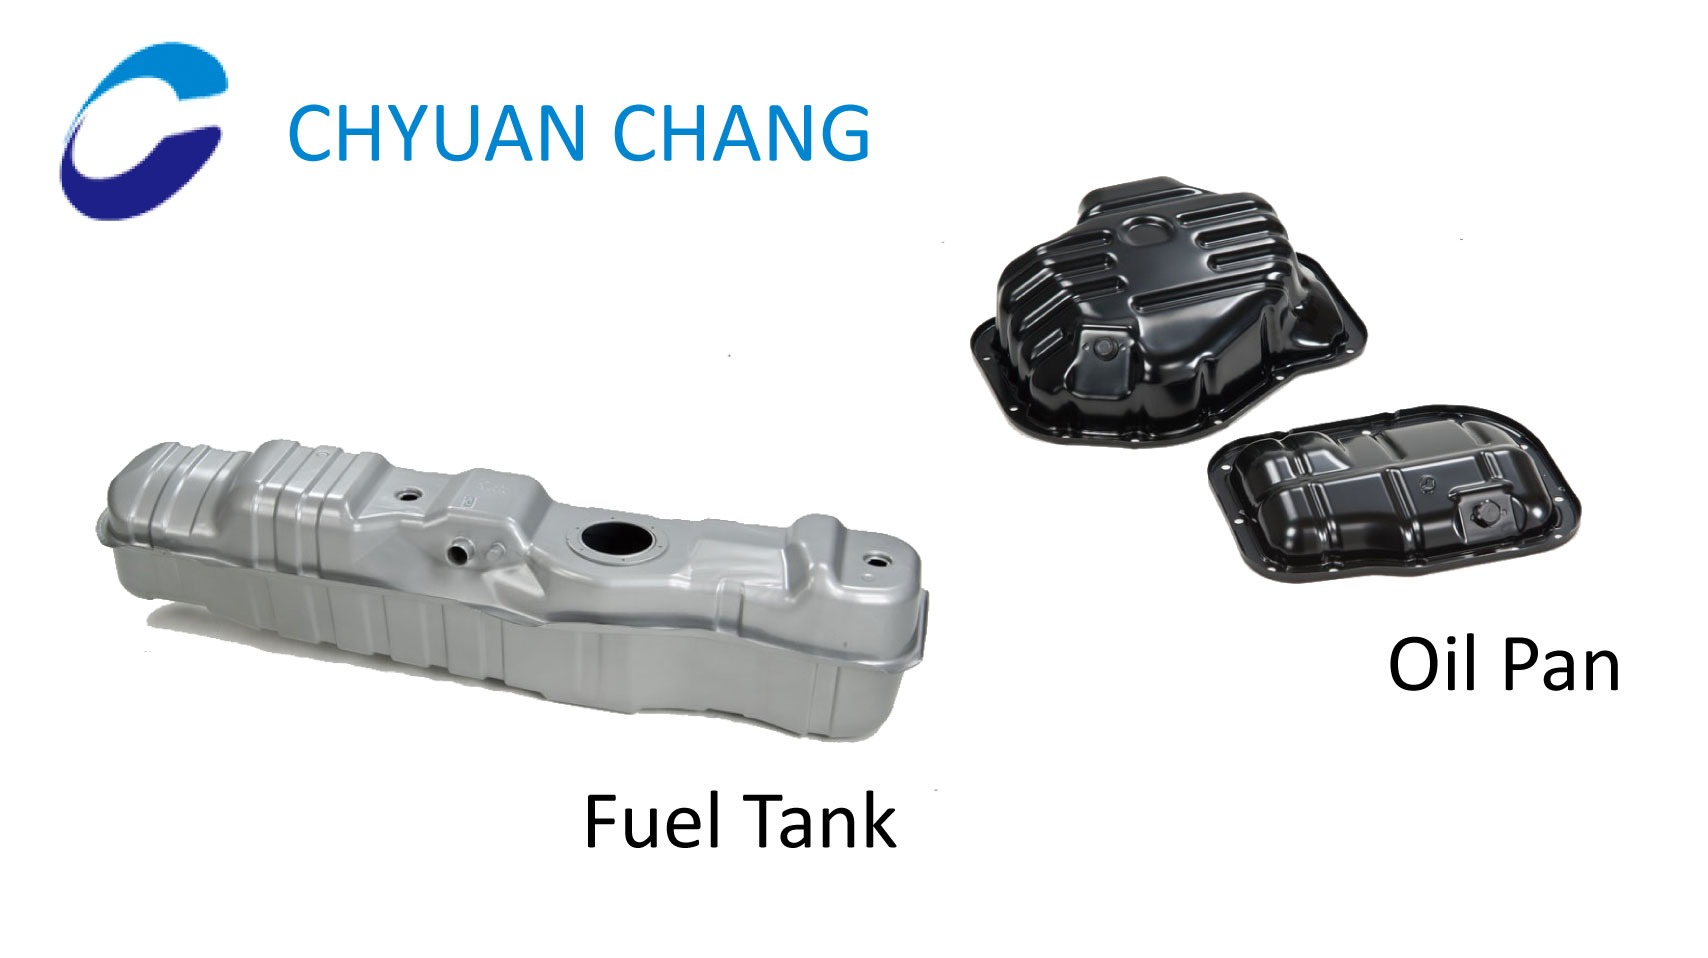 Fuel Tank, Oil Pan for Fuel System & Engine Fittings made by CHYUAN CHANG INDUSTRIAL CO., LTD.　泉錩工業股份有限公司 – MatchSupplier.com